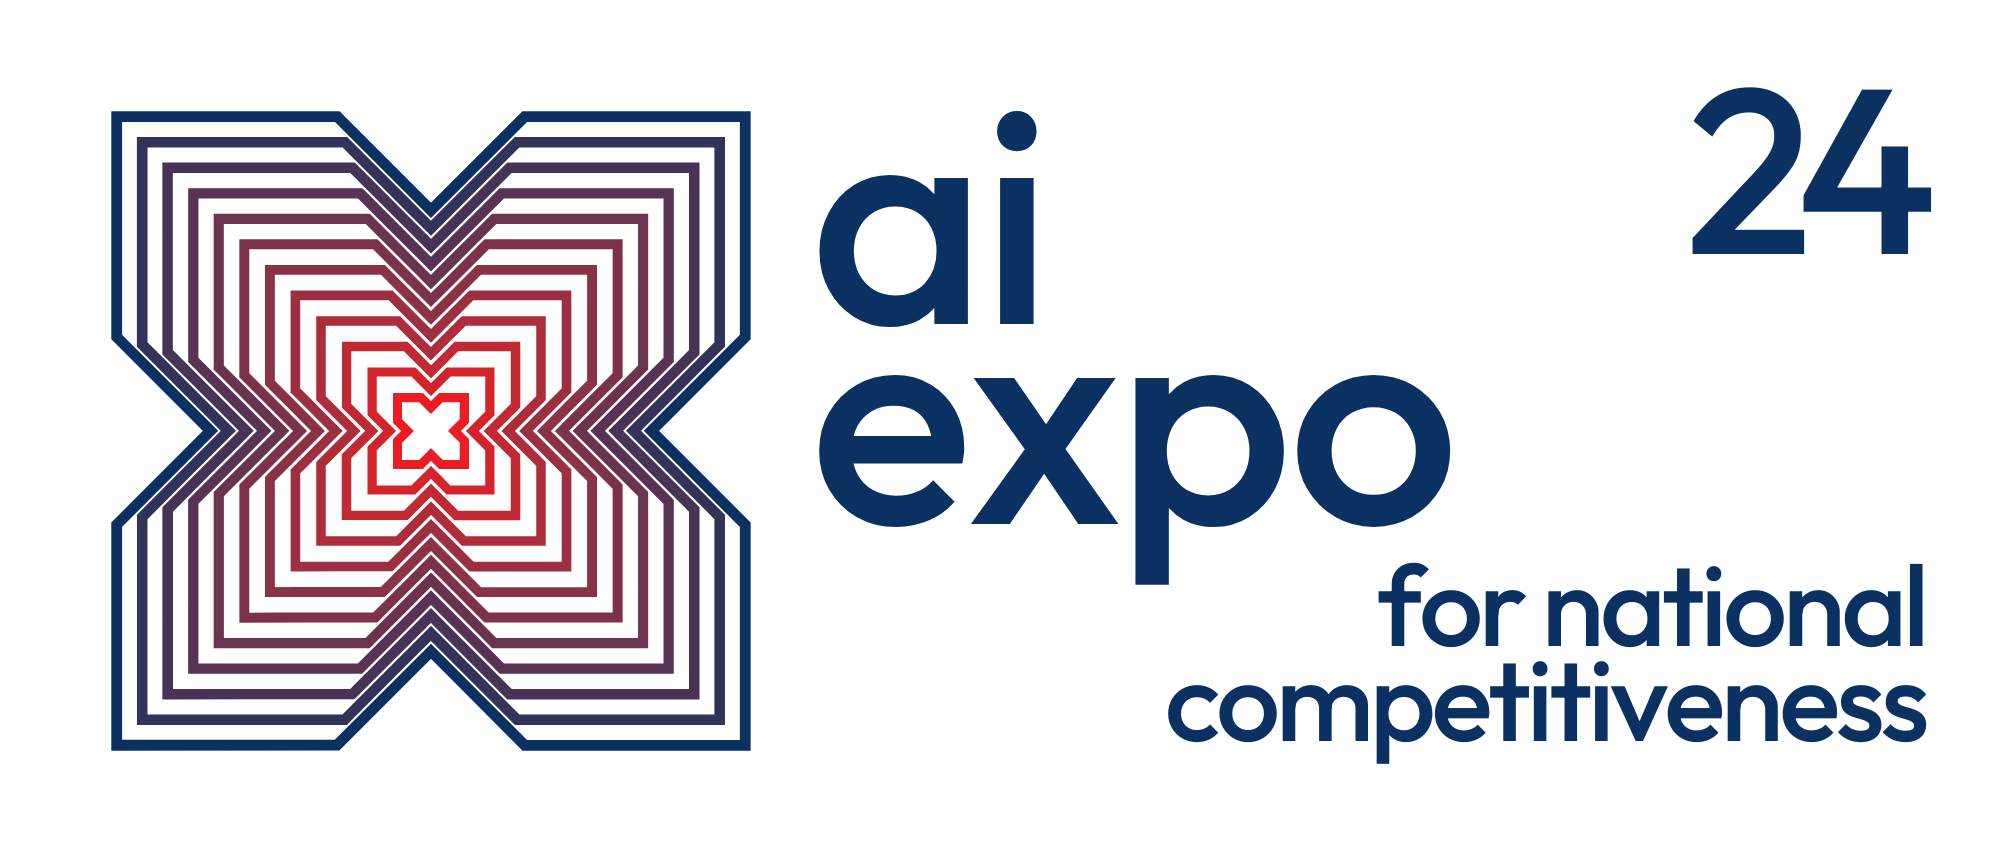 The AI Expo for National Competitiveness